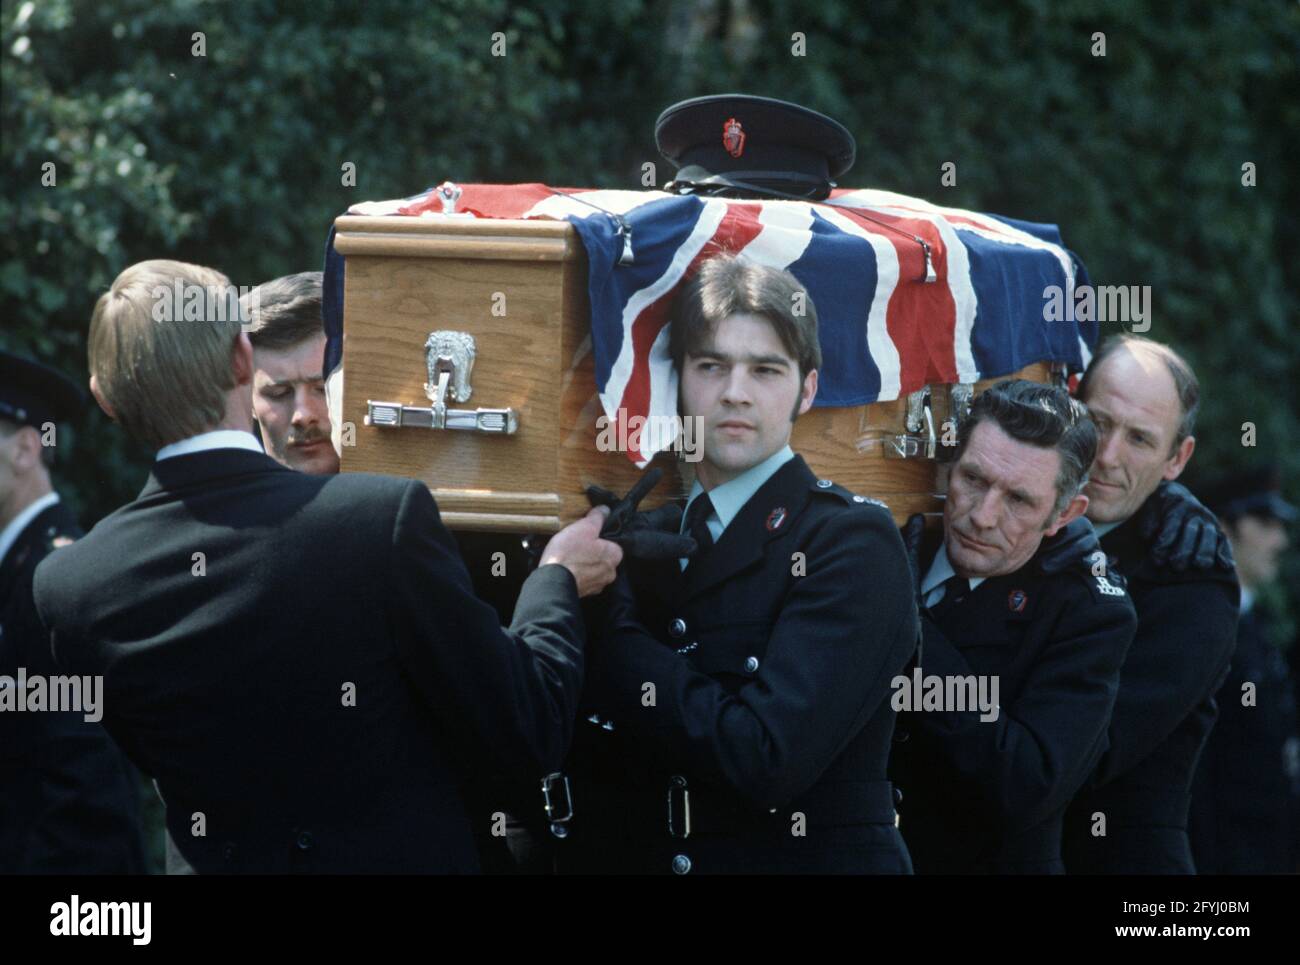 County Fermanagh, United Kingdom - September 1978. Murdered RUC, Royal Ulster Constabulary, Policeman Funeral during The Troubles, Northern Ireland, 1970s Stock Photo